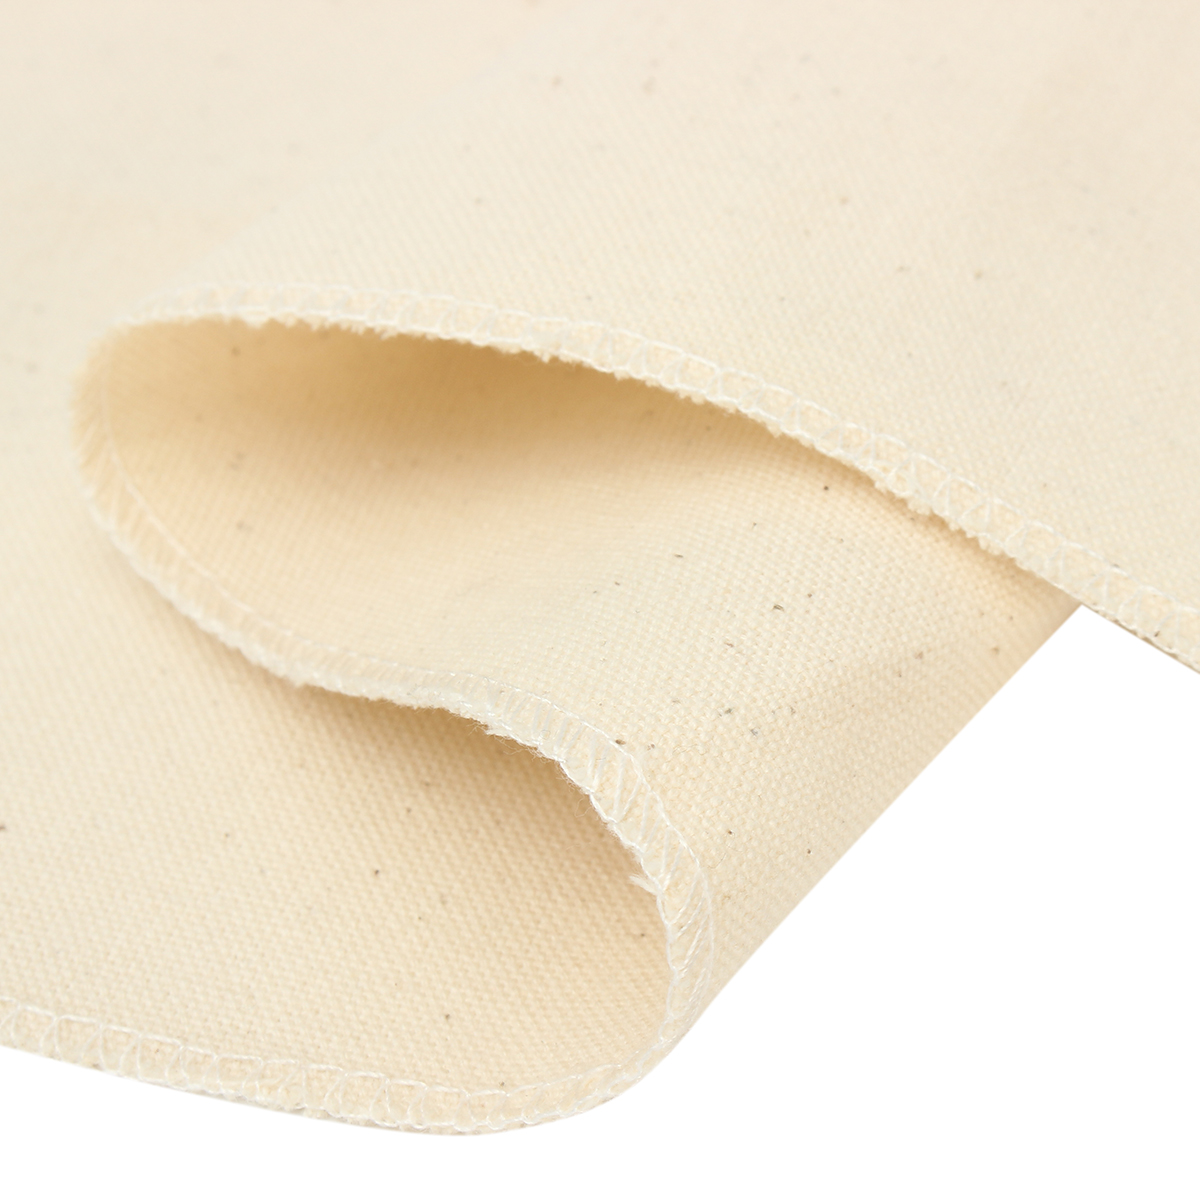 Flax-Liner-Cloth-Fiber-Cloth-Bakers-Proofing-Couche-for-Proving-Bread-Pans-Kitchen-Tool-Fermentation-1141080-4